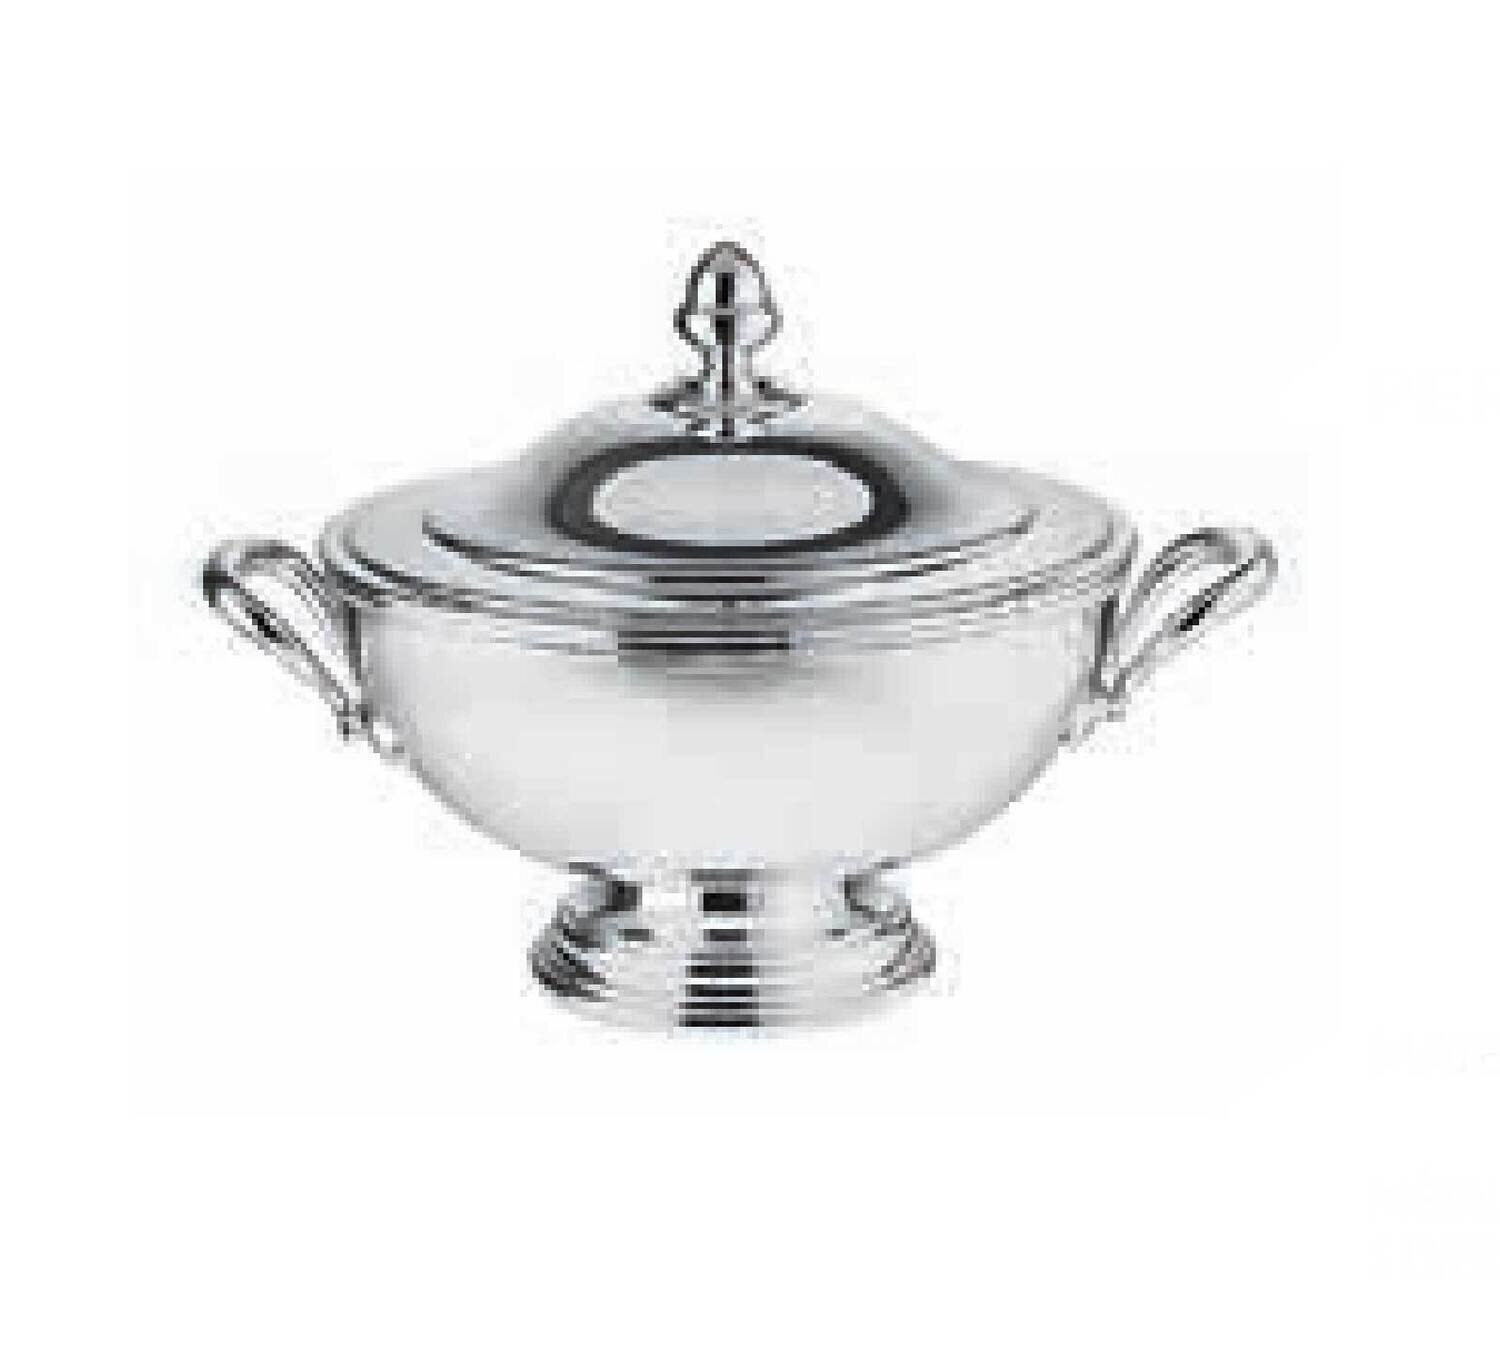 Ercuis Perles Soup Tureen 9.5 Inch Silver Plated F51P200-24